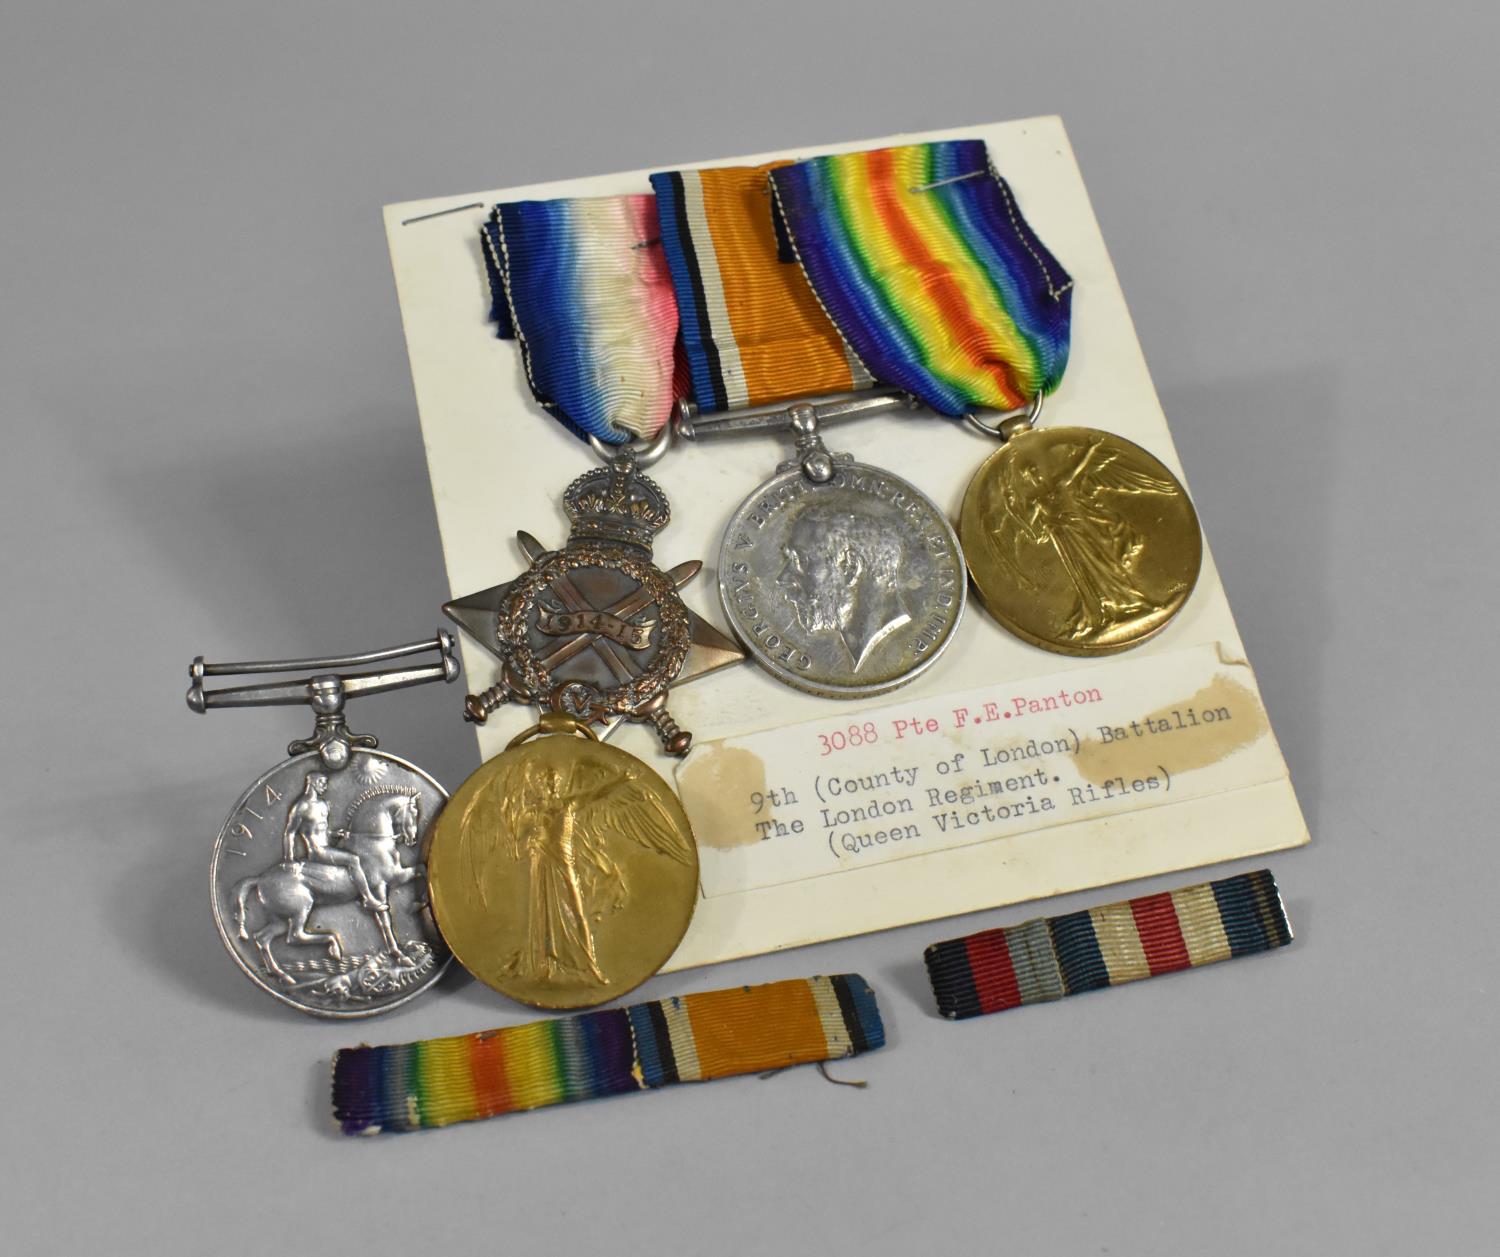 A Collection of WWI Medals Awarded to 3088 PTE F E Panton, London Regiment Together with Two for